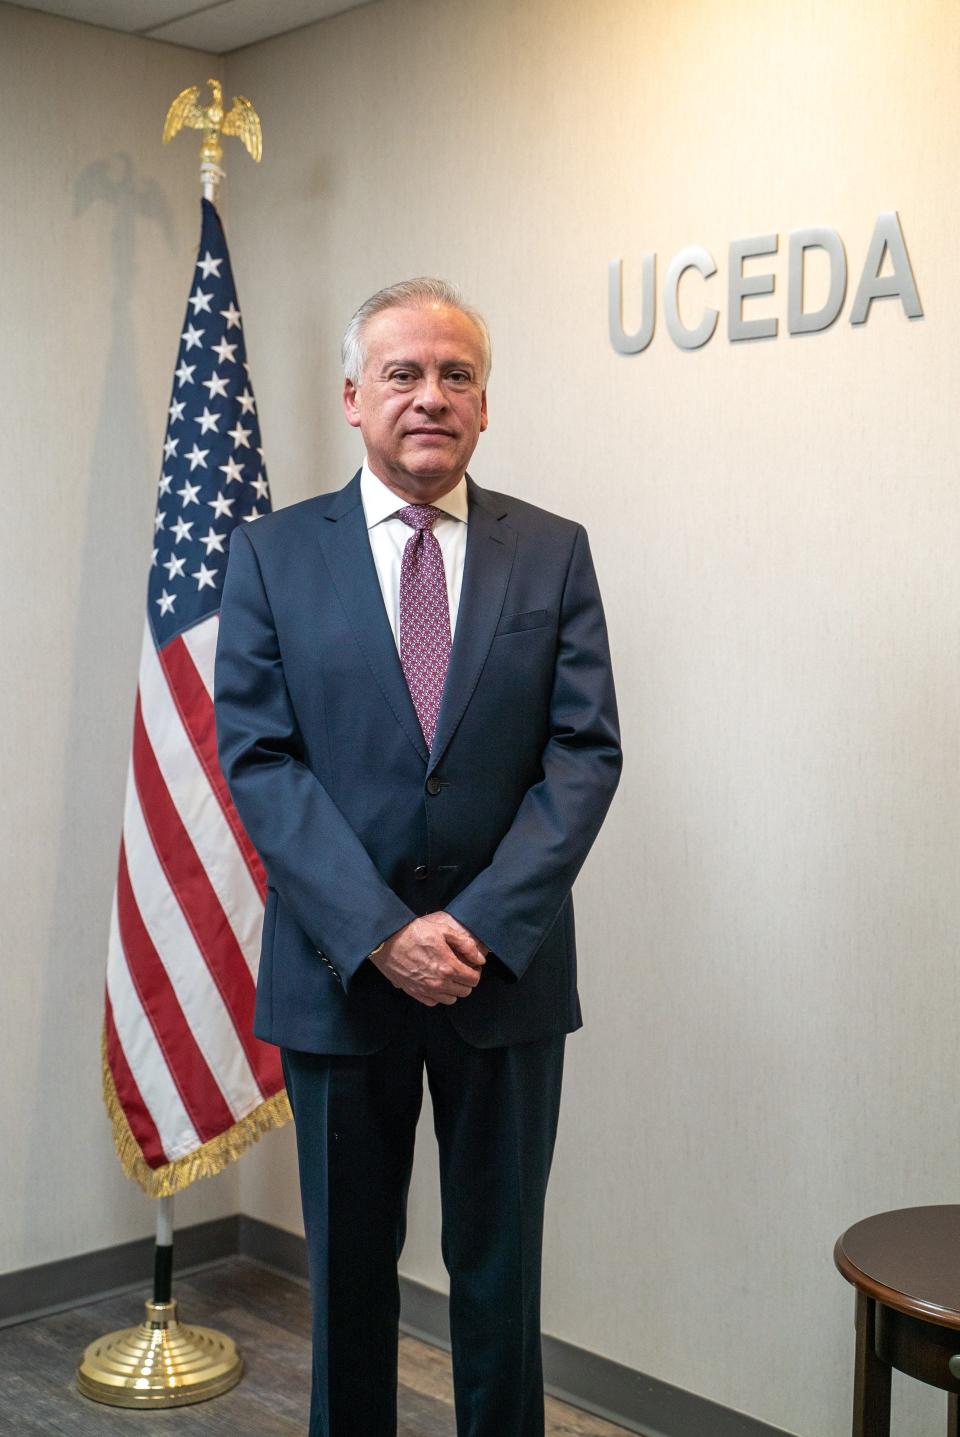 Carlos Uceda is the president and CEO of the Uceda Institute, a language school that will celebrate its 35th anniversary in Paterson on July 19.